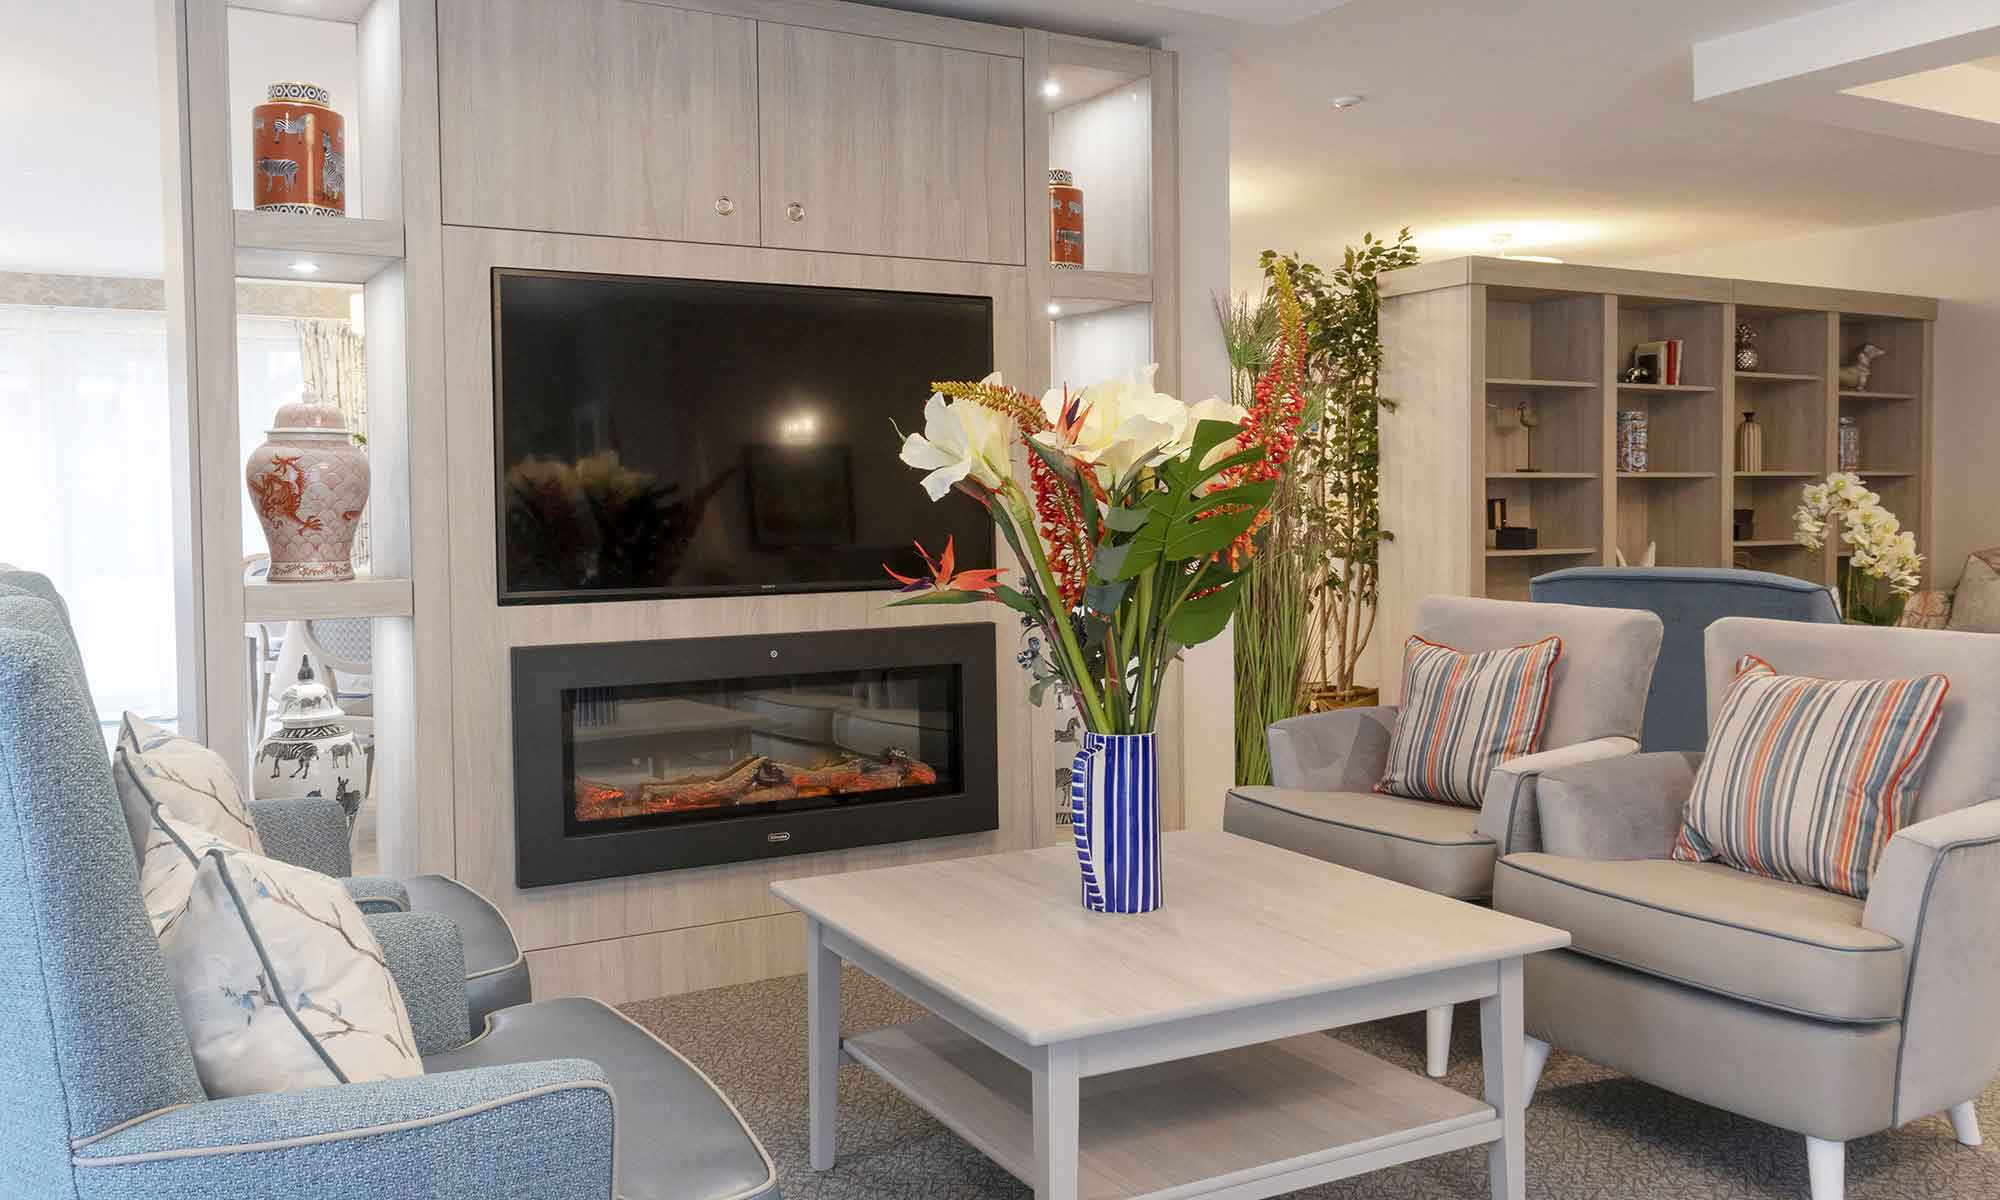 A residents' lounge at a St Mary's care home. Bespoke cabinetry with an inbuilt fire and TV. The Lubeck square coffee table with a flower arrangement in a blue striped jug and 2 Saluzzo high back and 2 Saluzzo low back chairs.